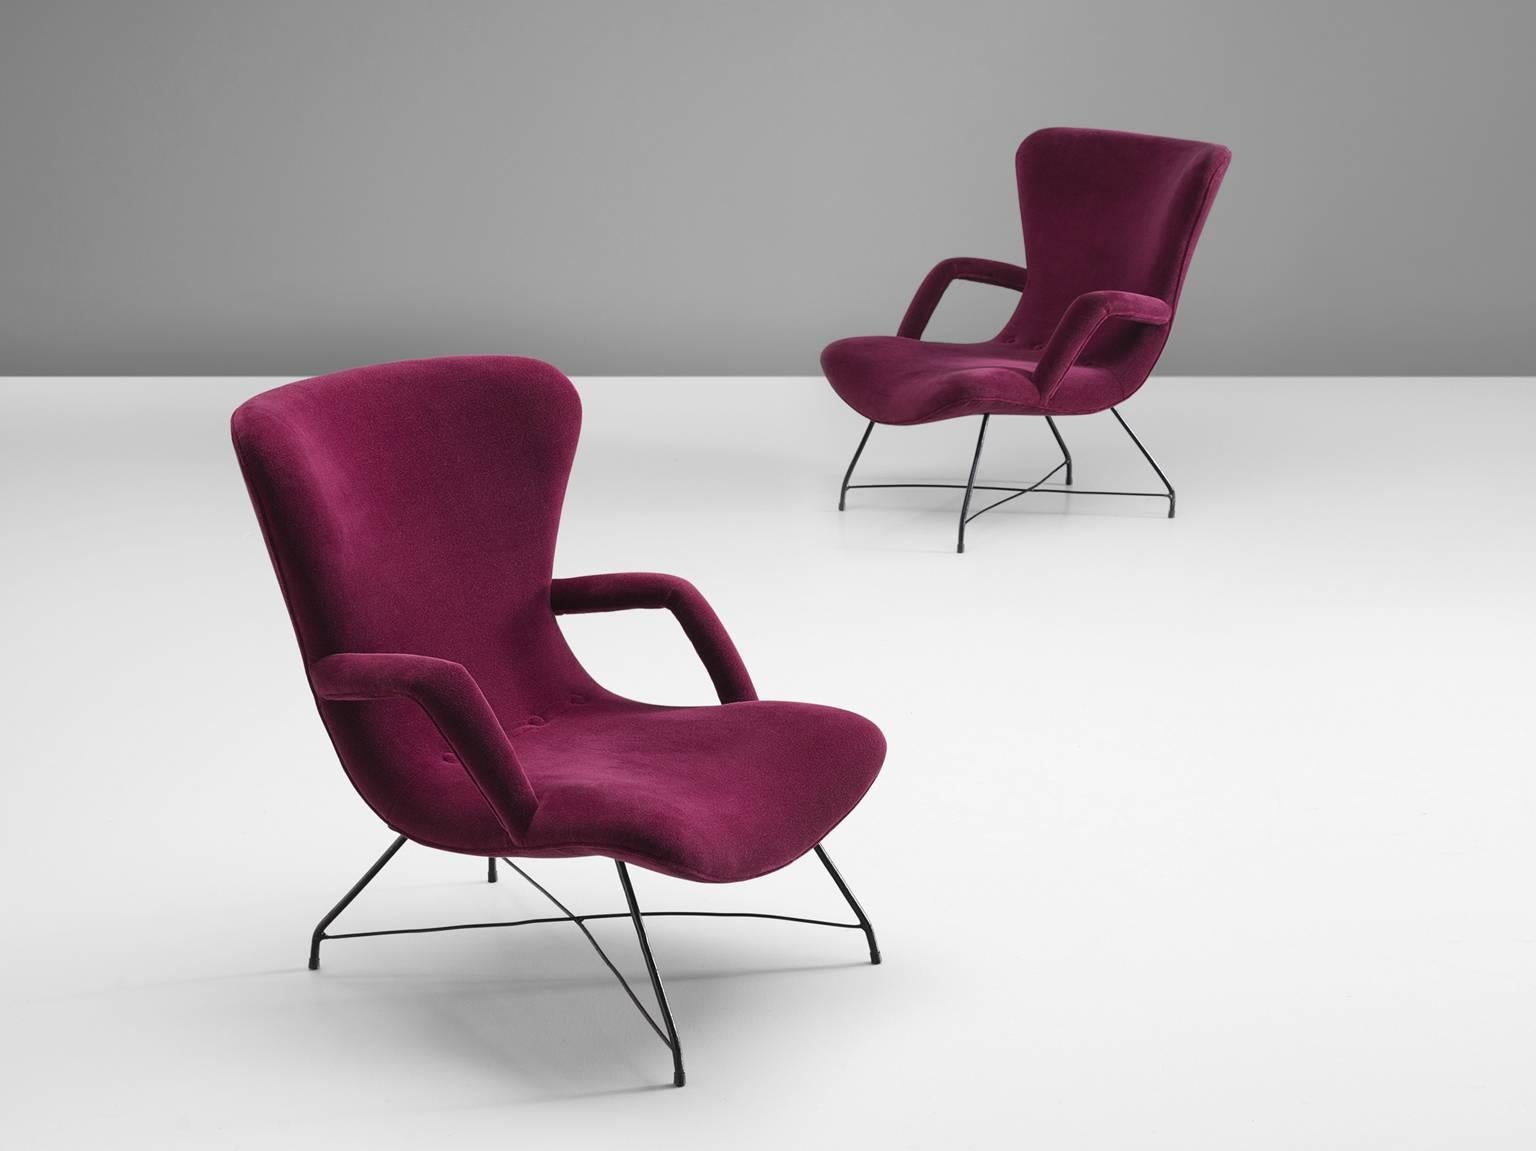 Carlo Hauner and Martin Eisler for Forma, pair of armchairs, iron and pink magenta velvet fabric, by Brazil, 1950s. 

Elegant and modern armchairs by Brazilian designer duo Hauner & Eisler. The frame is made from thin, elegant wrought iron. Due